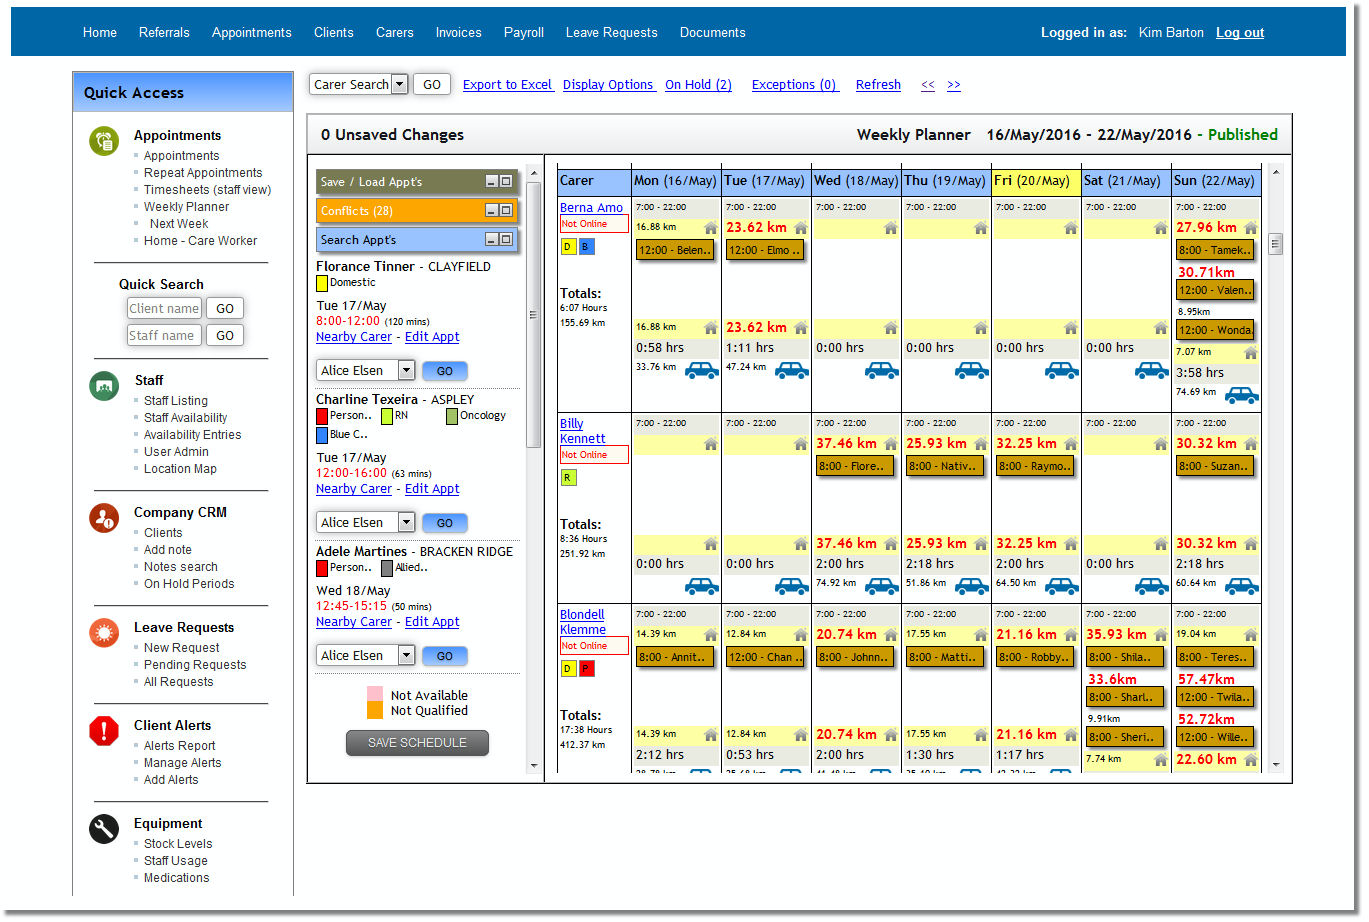 TurnPoint Software - Manage staff rostering & scheduling